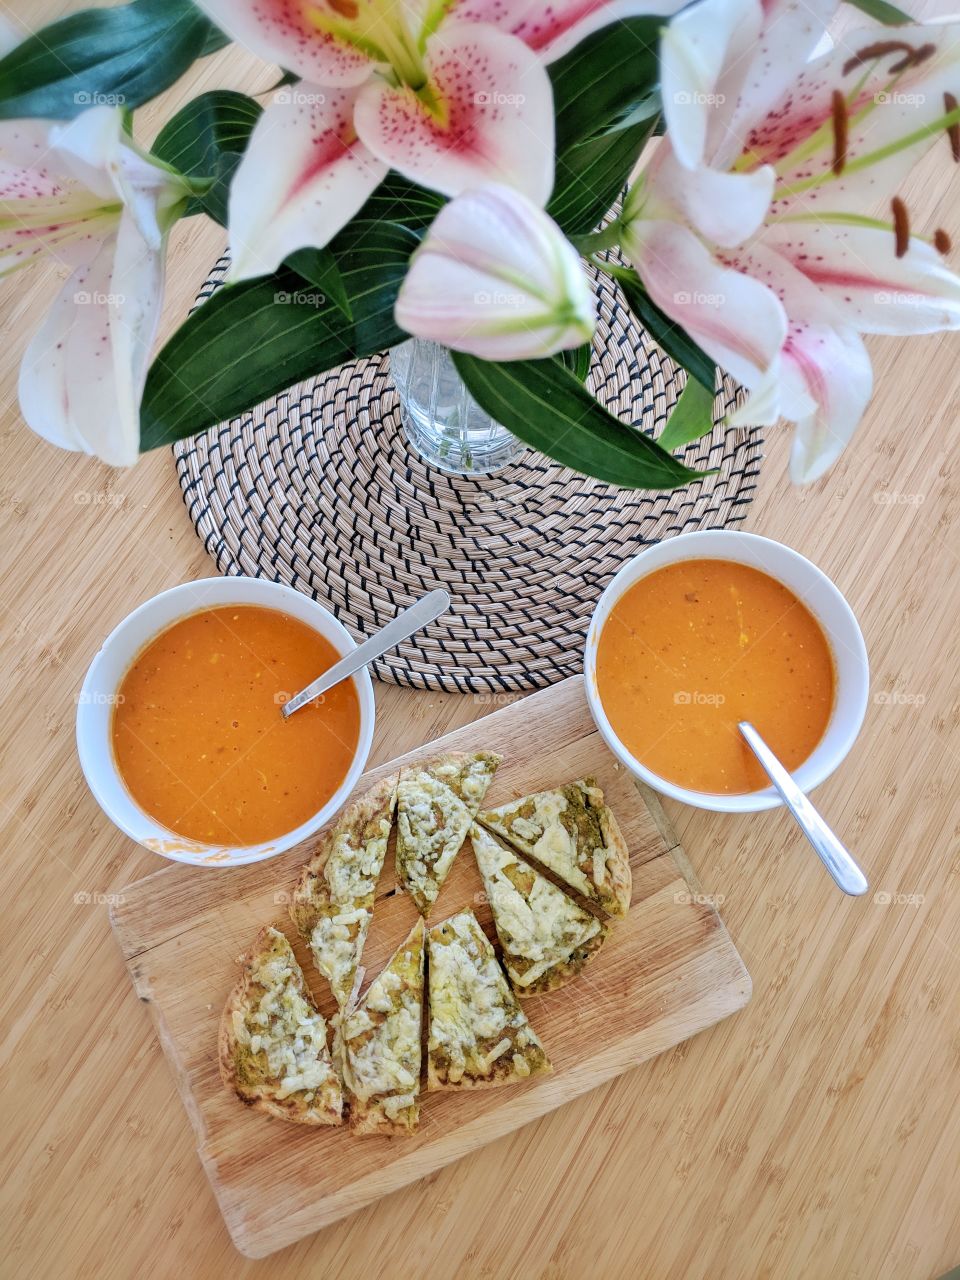 A rich and smooth cream tomato soup with a crunchy naan bread topped with pesto and cheddar